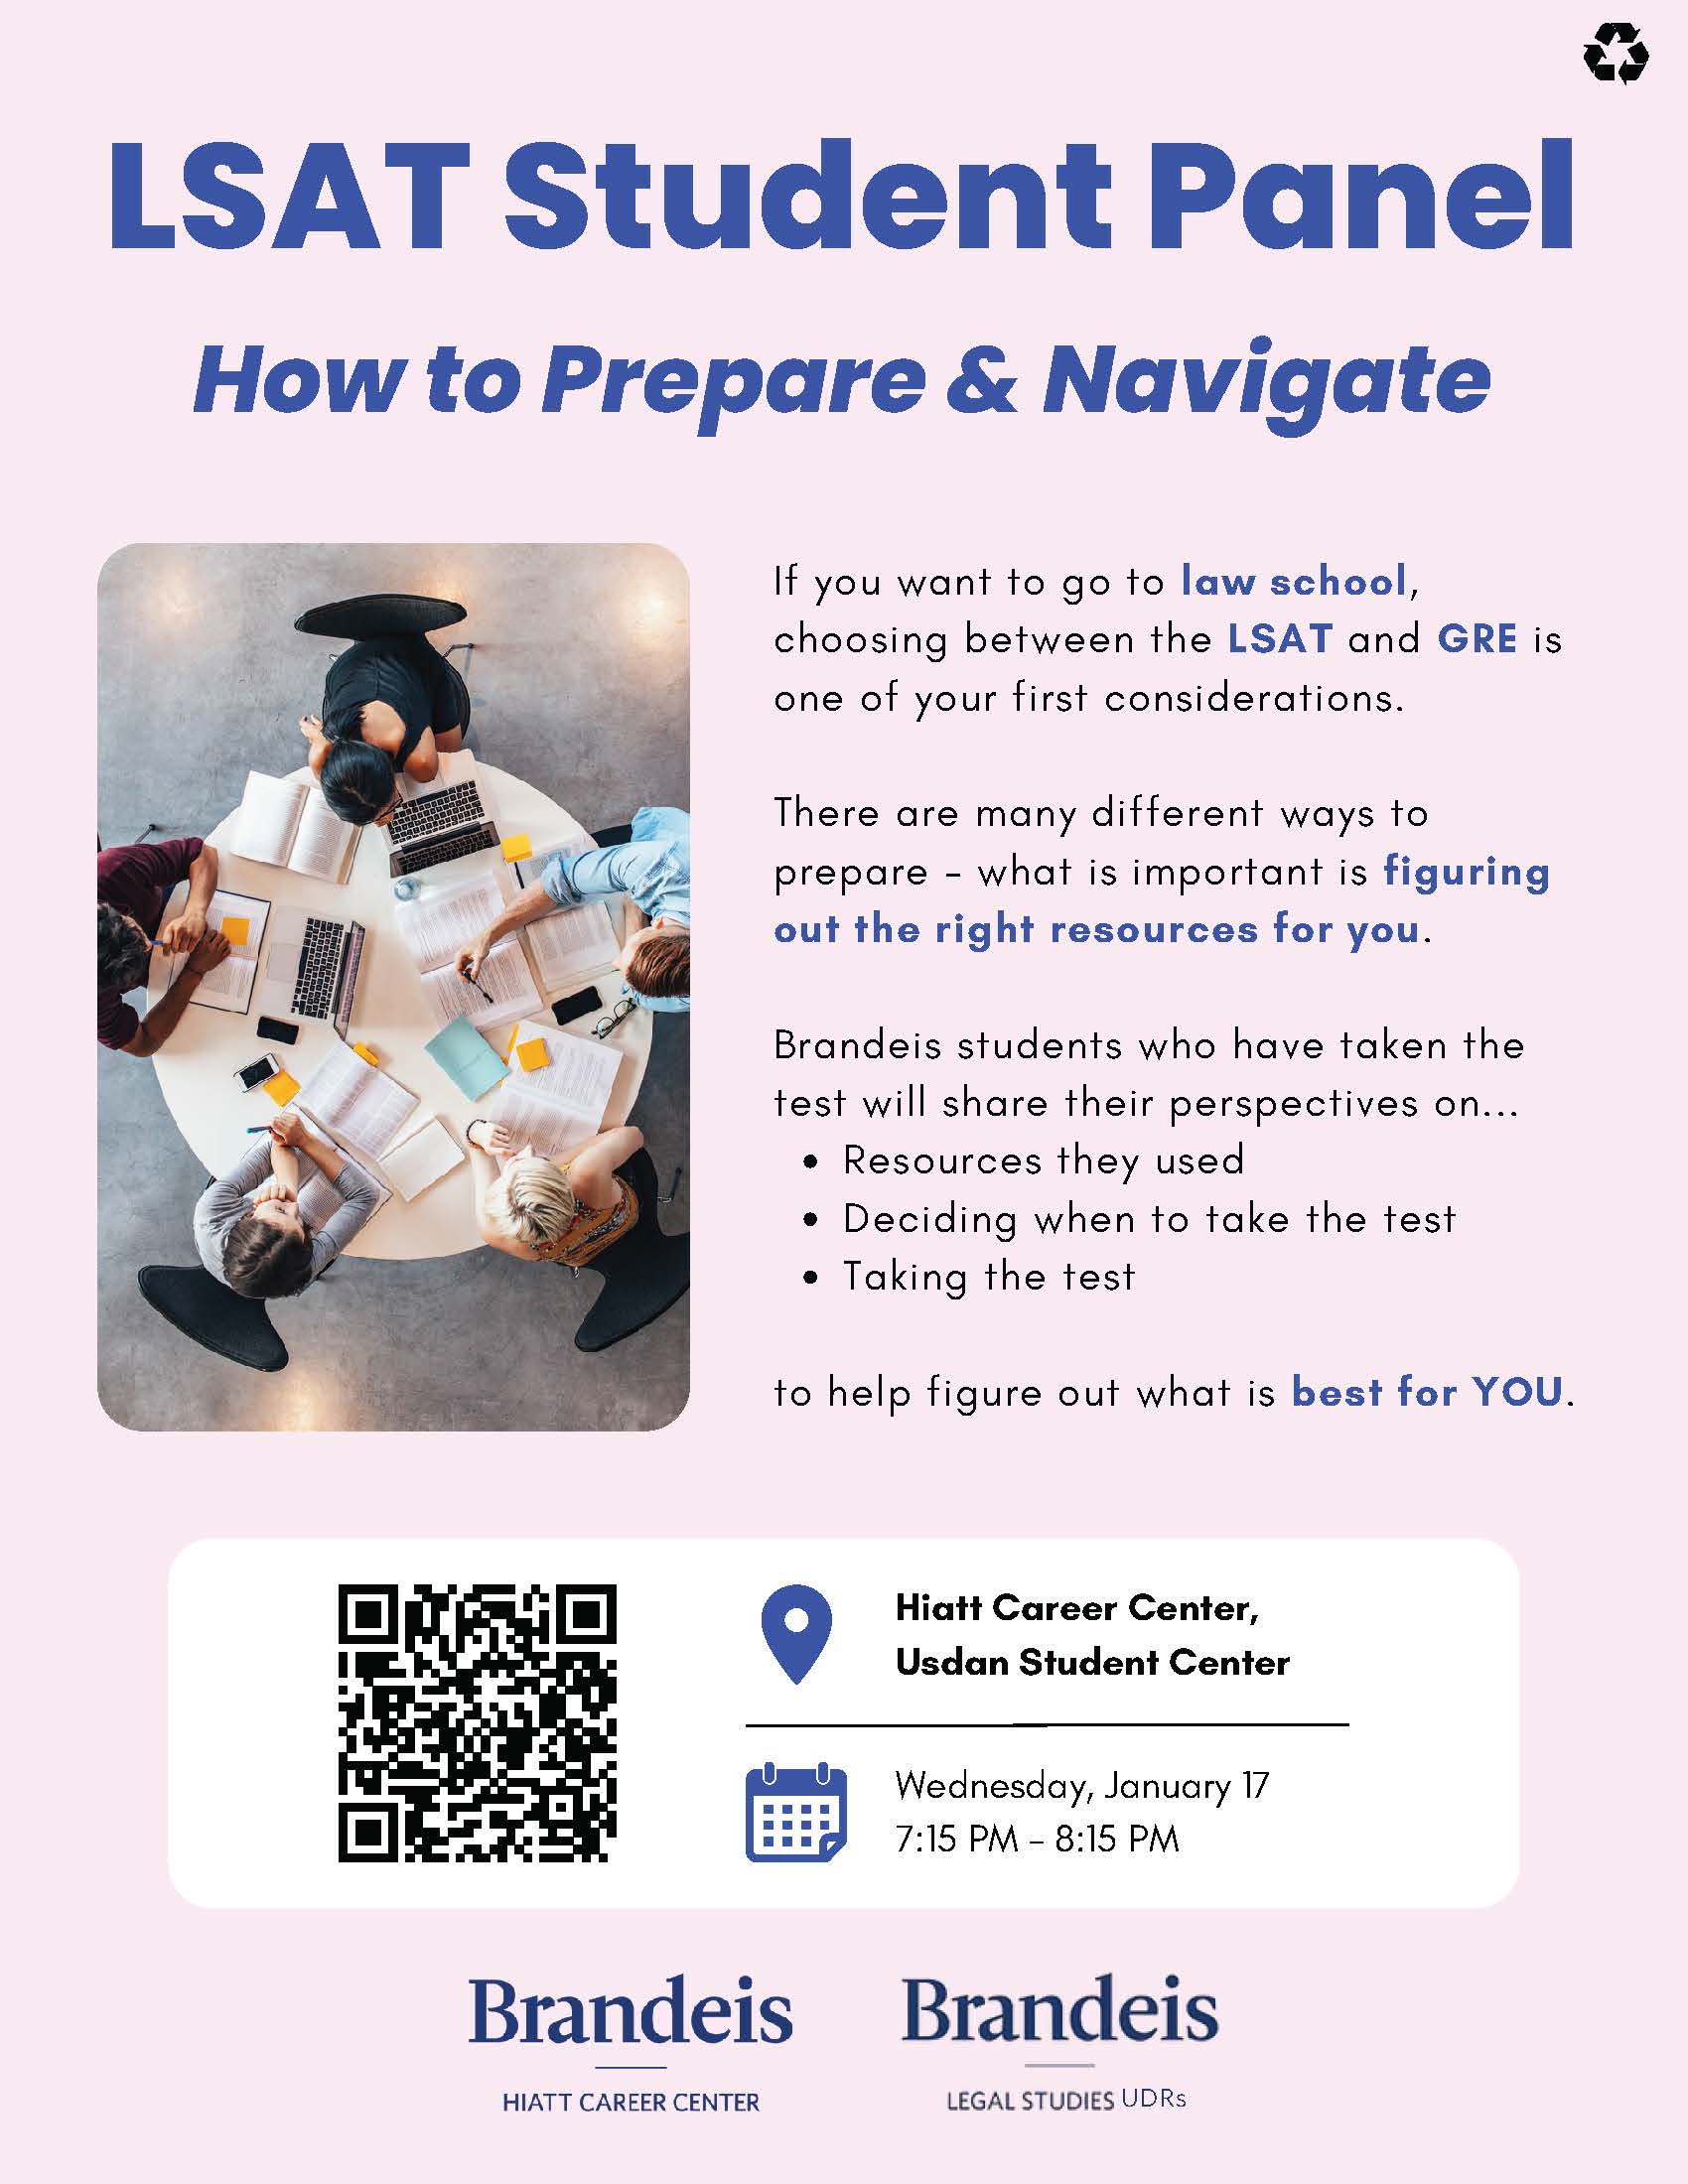 LSAT Student Panel: How to Prepare & Navigate poster